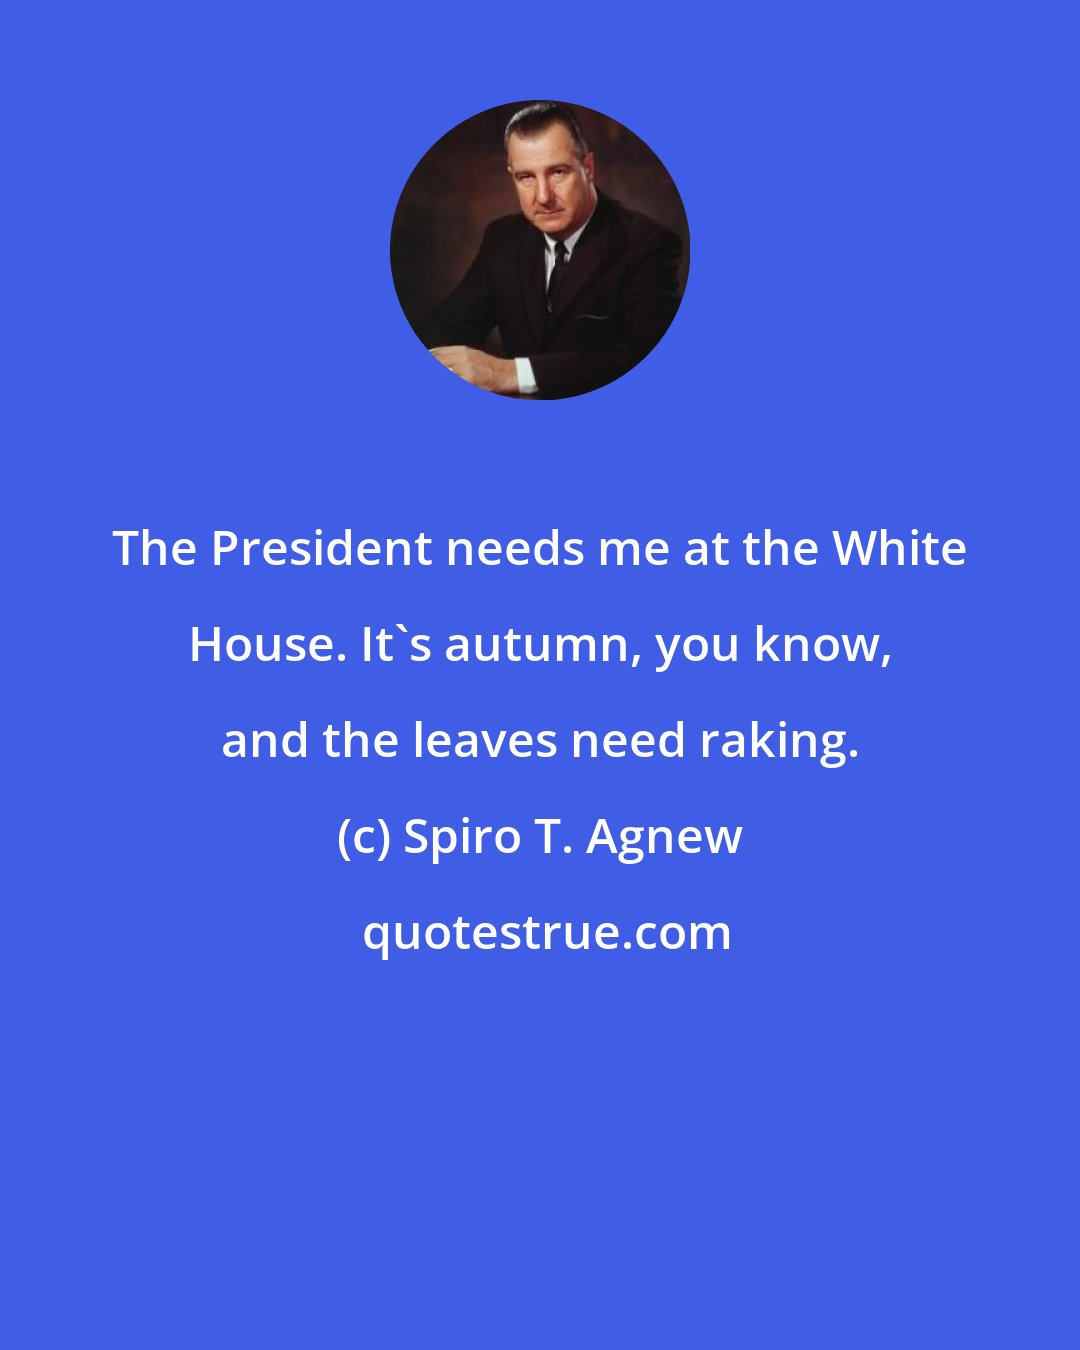 Spiro T. Agnew: The President needs me at the White House. It's autumn, you know, and the leaves need raking.